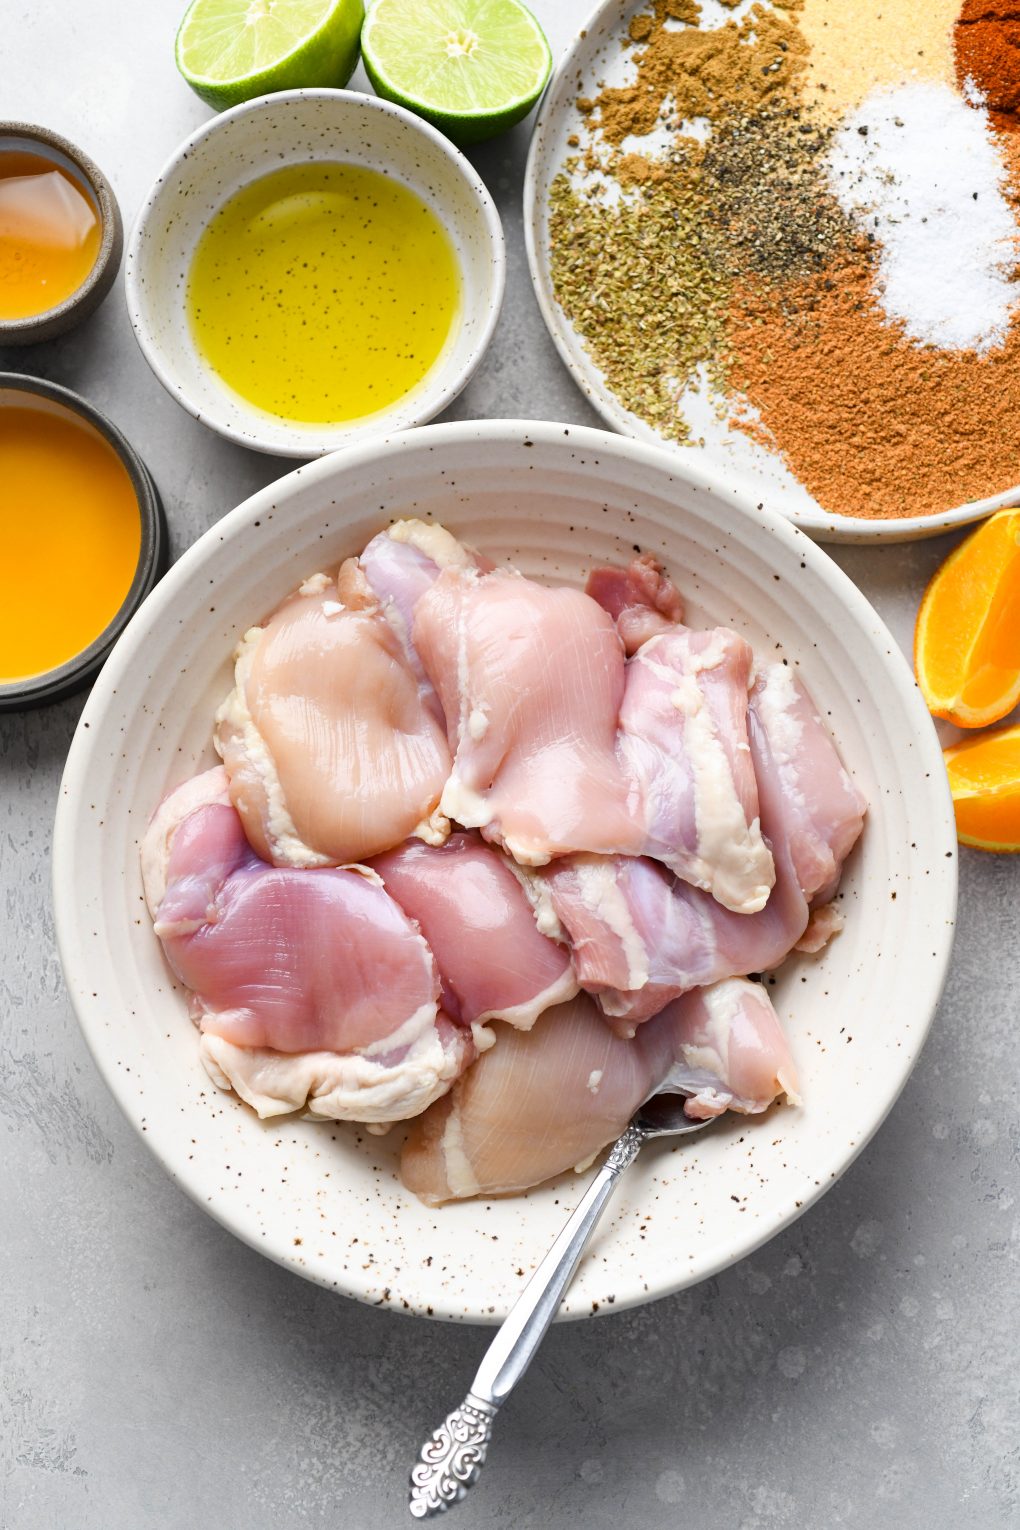 Overhead shot of the ingredients for sheet pan shredded chicken tacos - a bowl of raw boneless skinless chicken thighs, various dried spices, olive oil, orange juice, and lime juice.